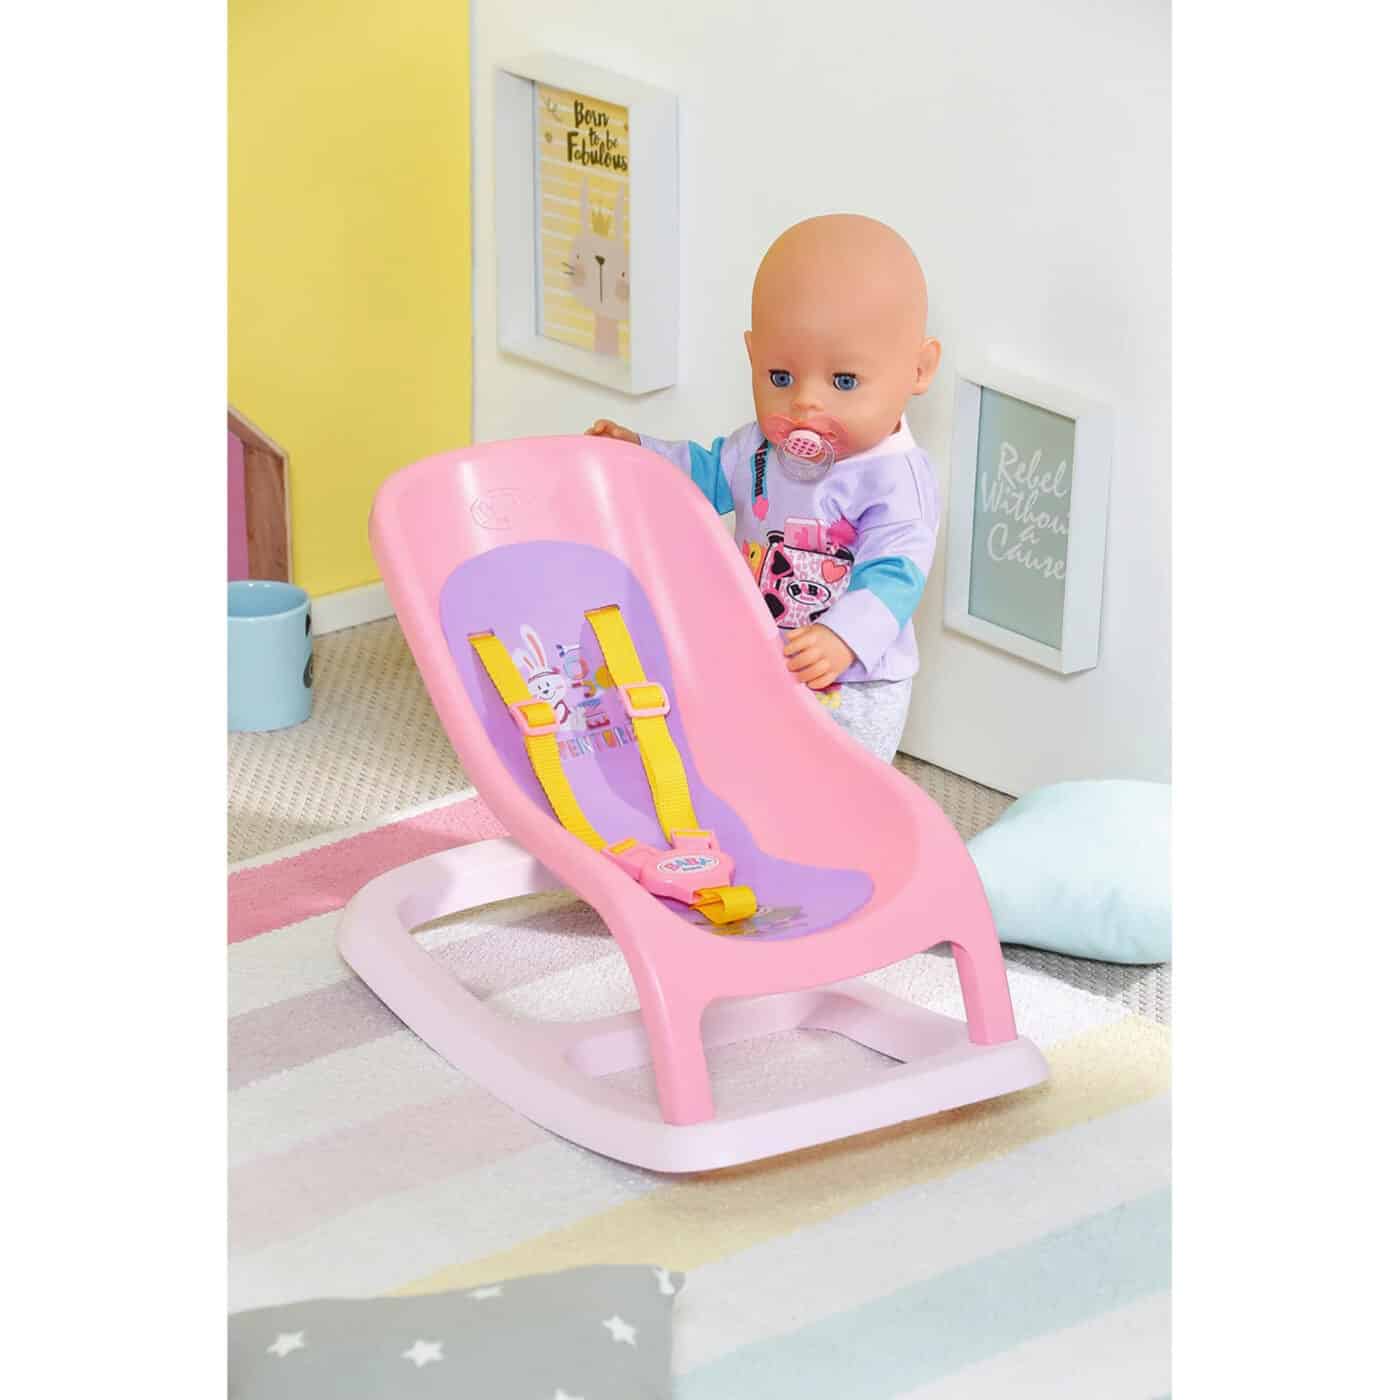 Baby Born Bouncing Chair2